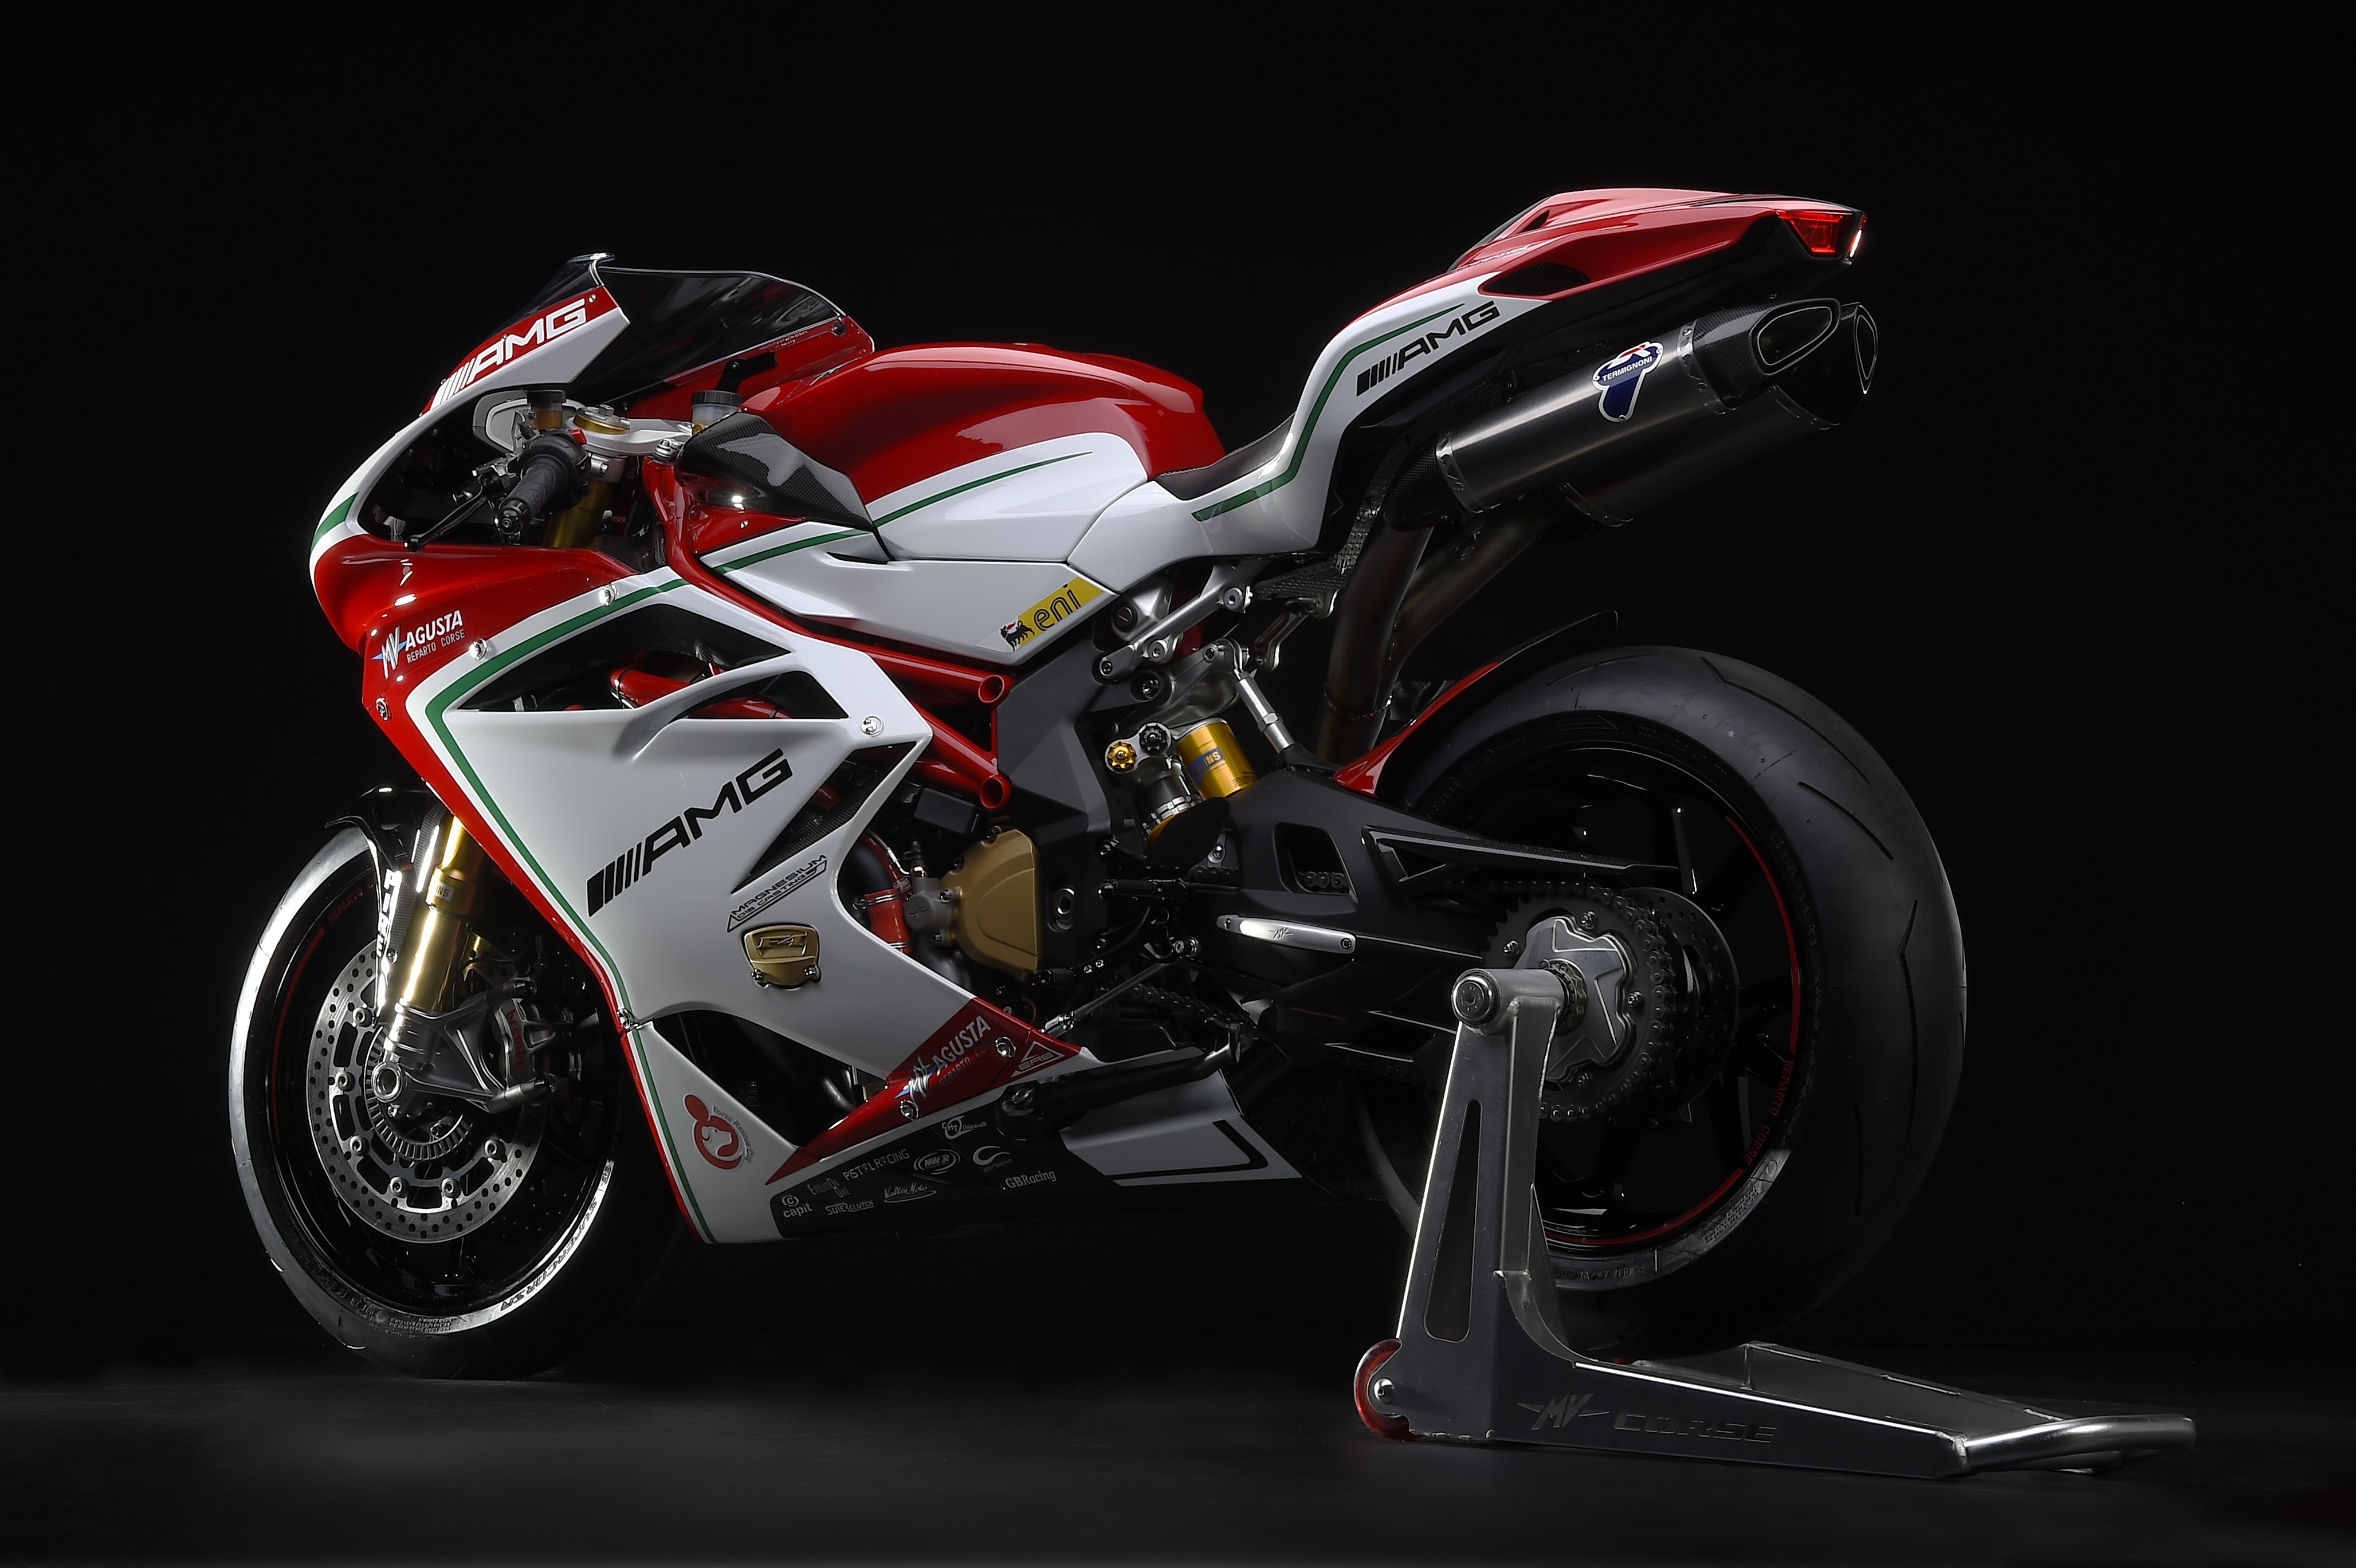 General 4112x2737 MV Agusta F4 RC superbike motorcycle exhaust pipes black background MV agusta vehicle